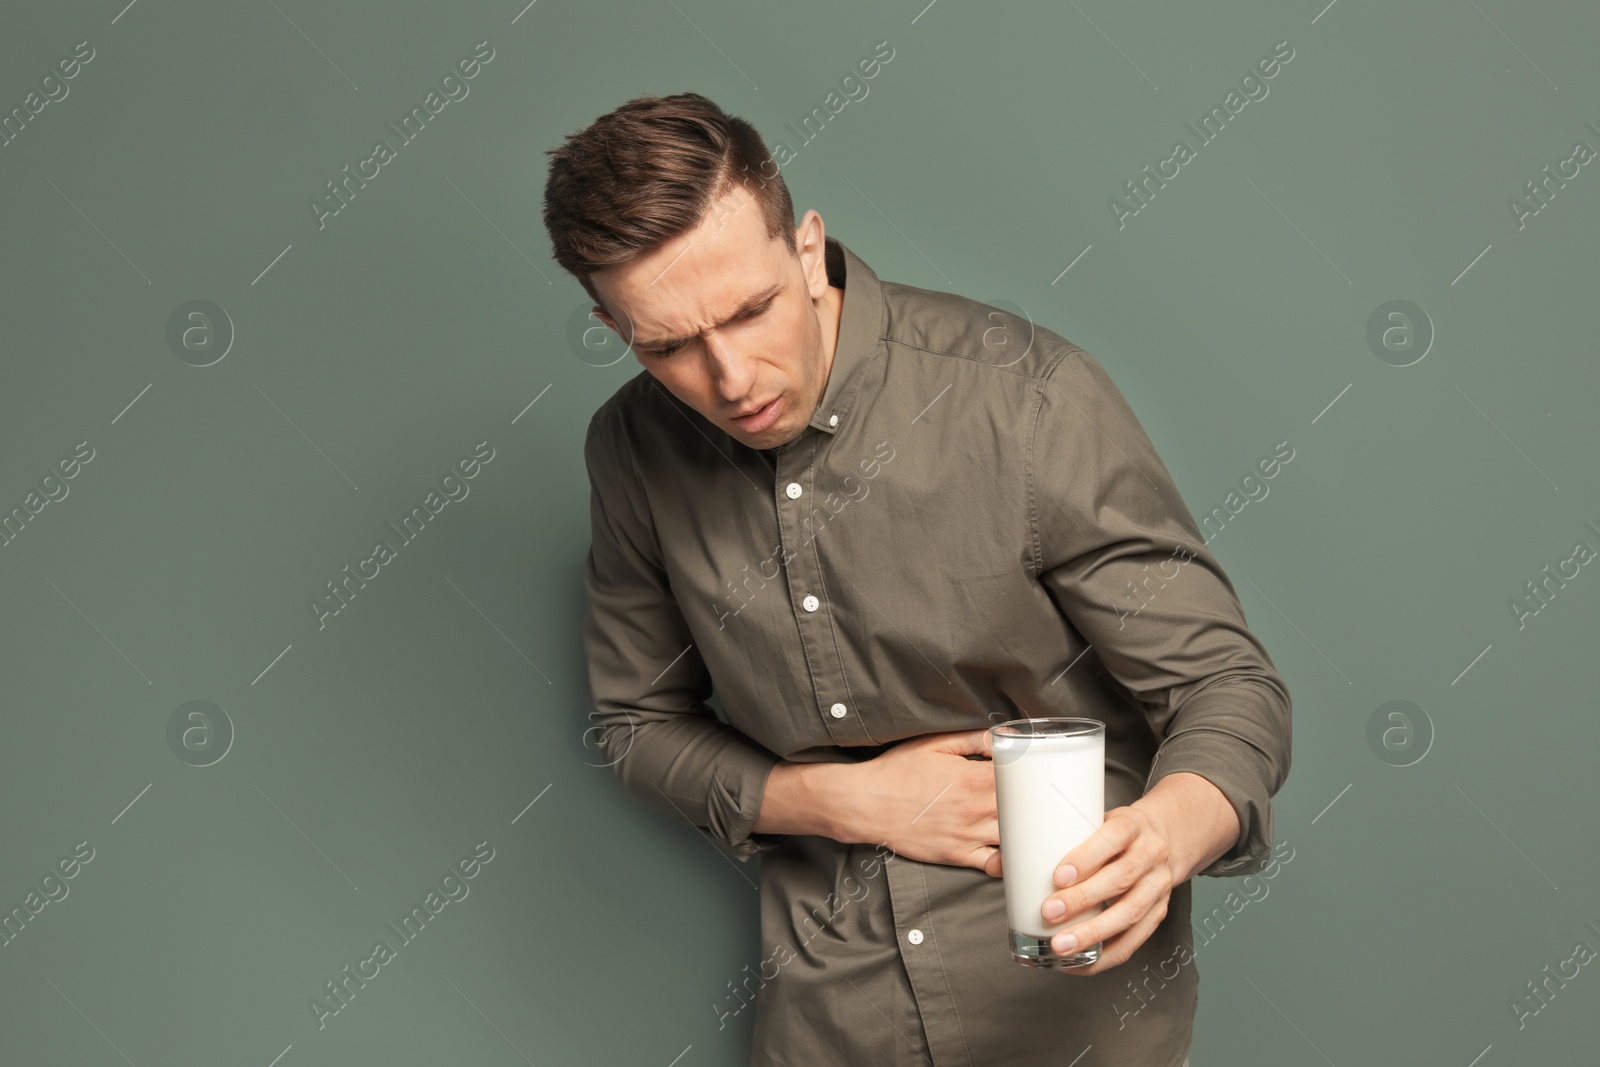 Photo of Young man with dairy allergy holding glass of milk on color background